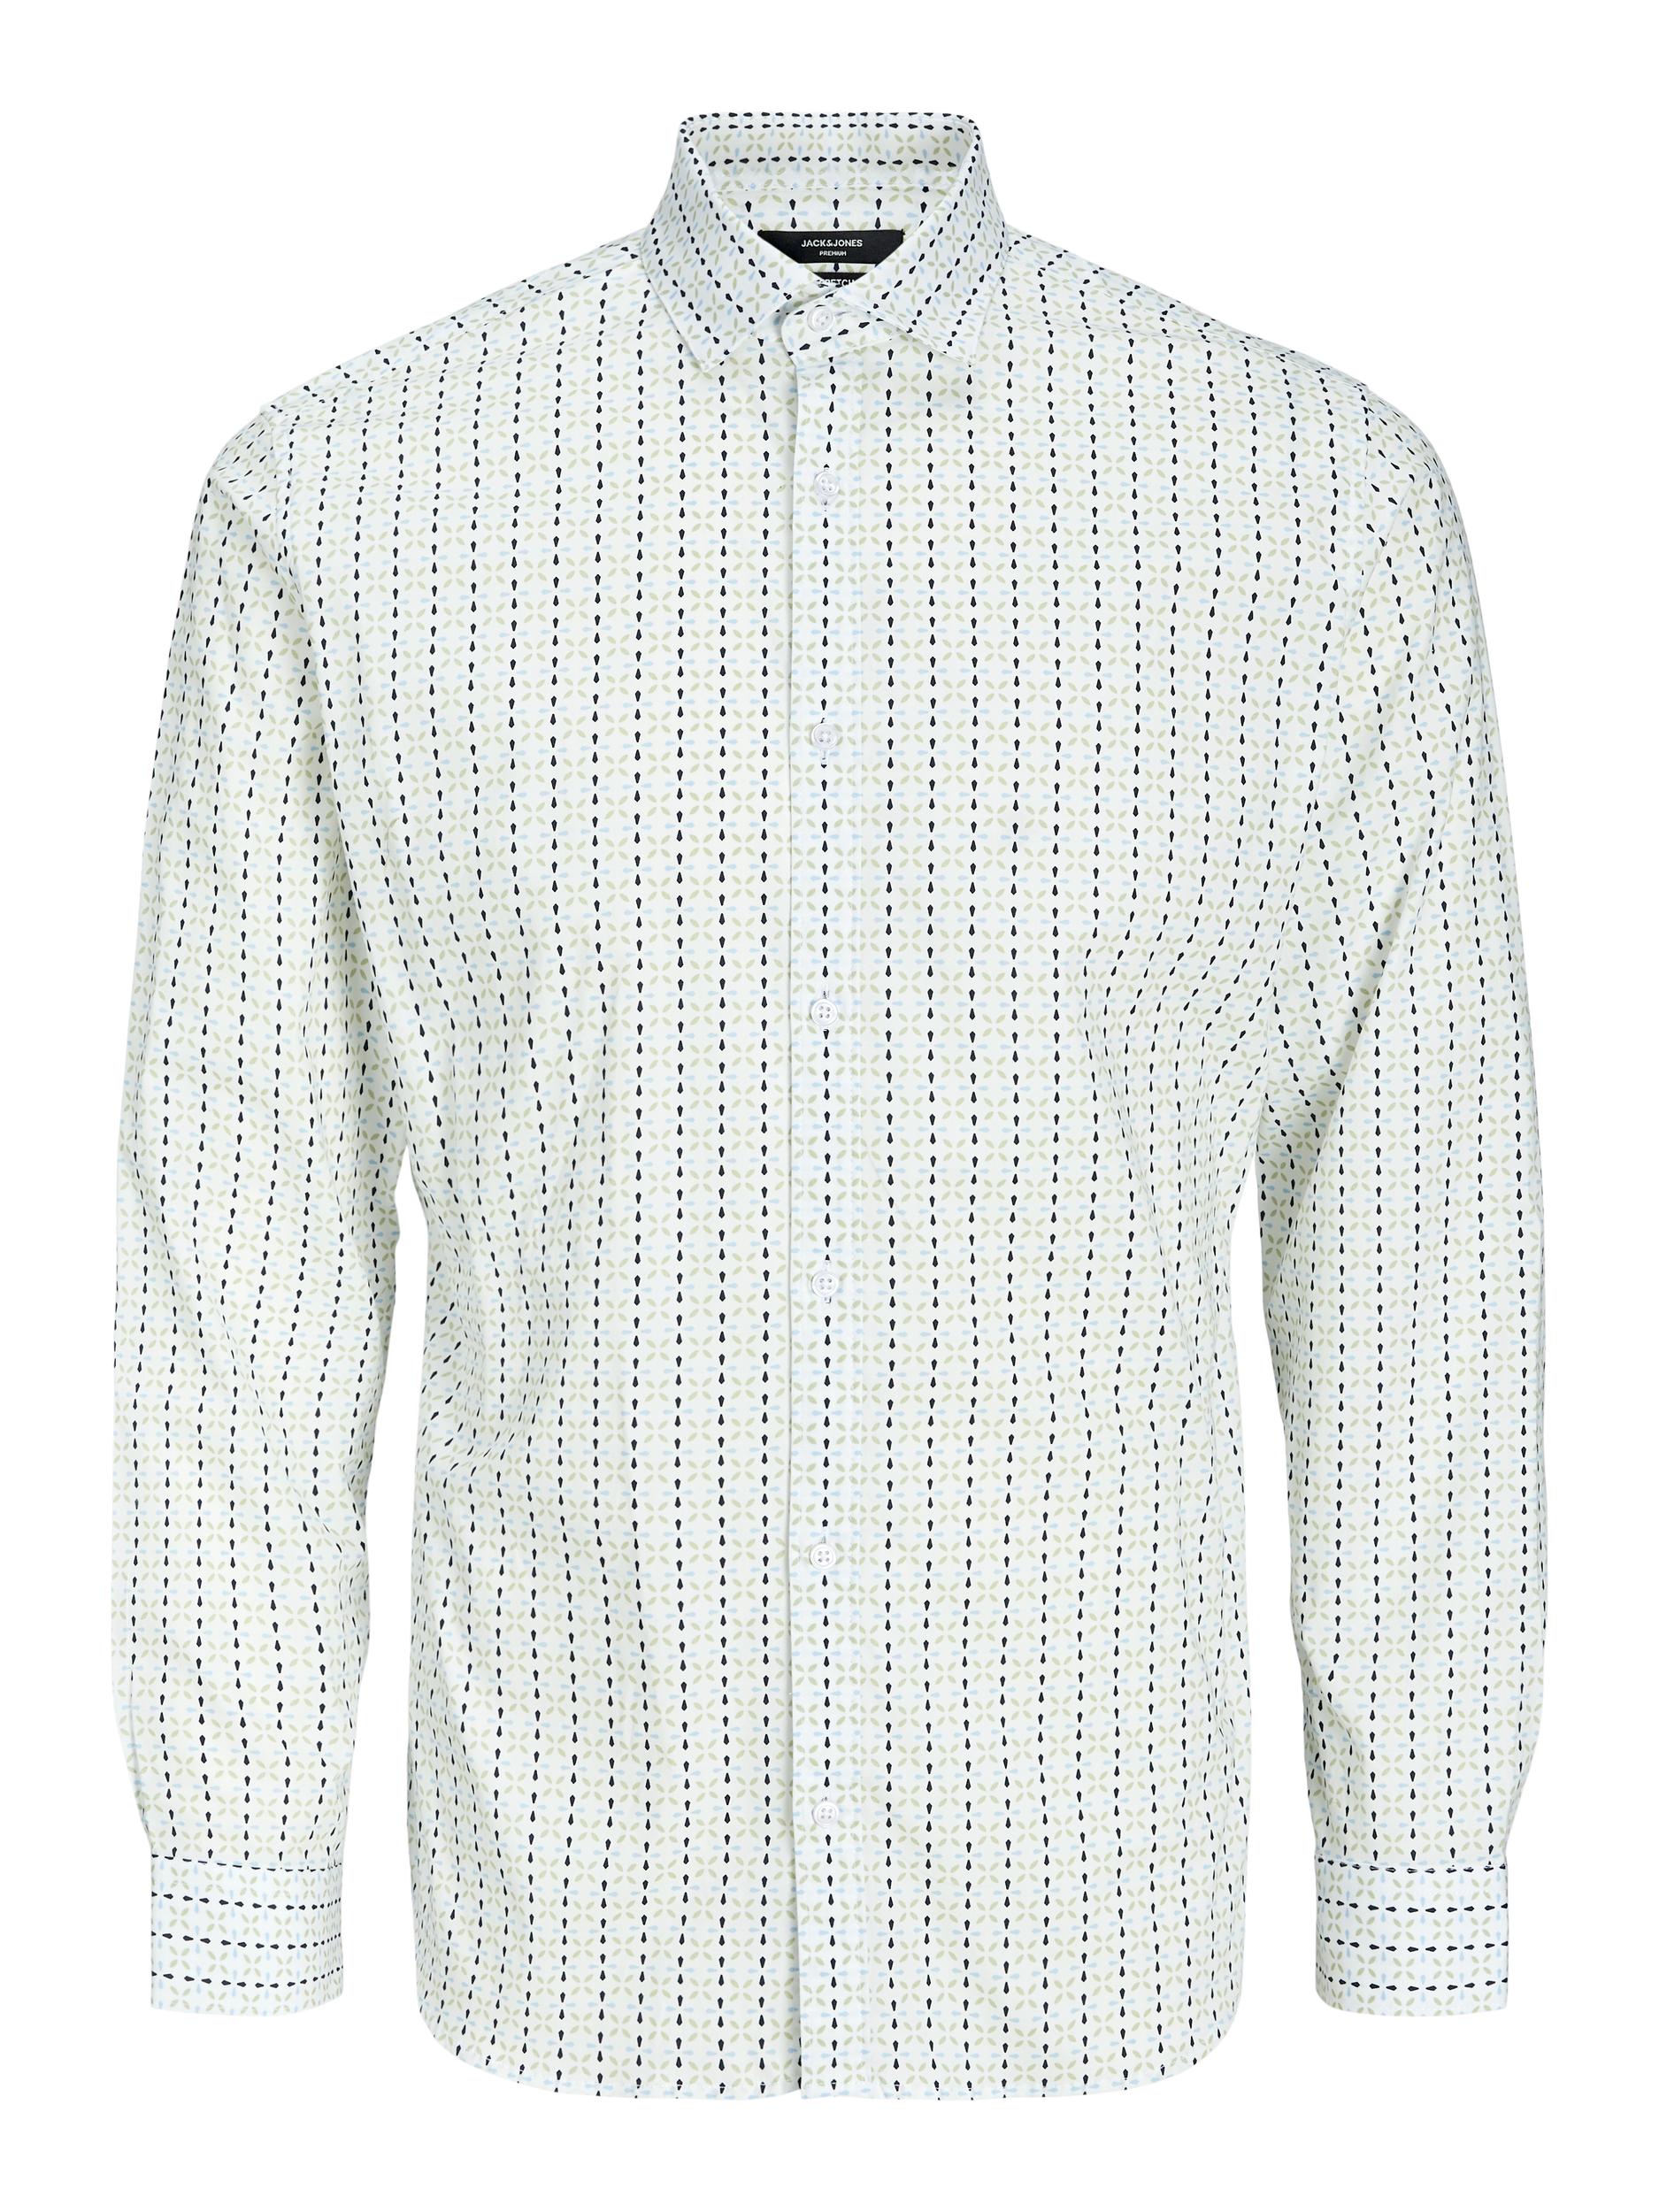 Men's Blackpool Stretch Shirt Long Sleeve White-Ghost Front View